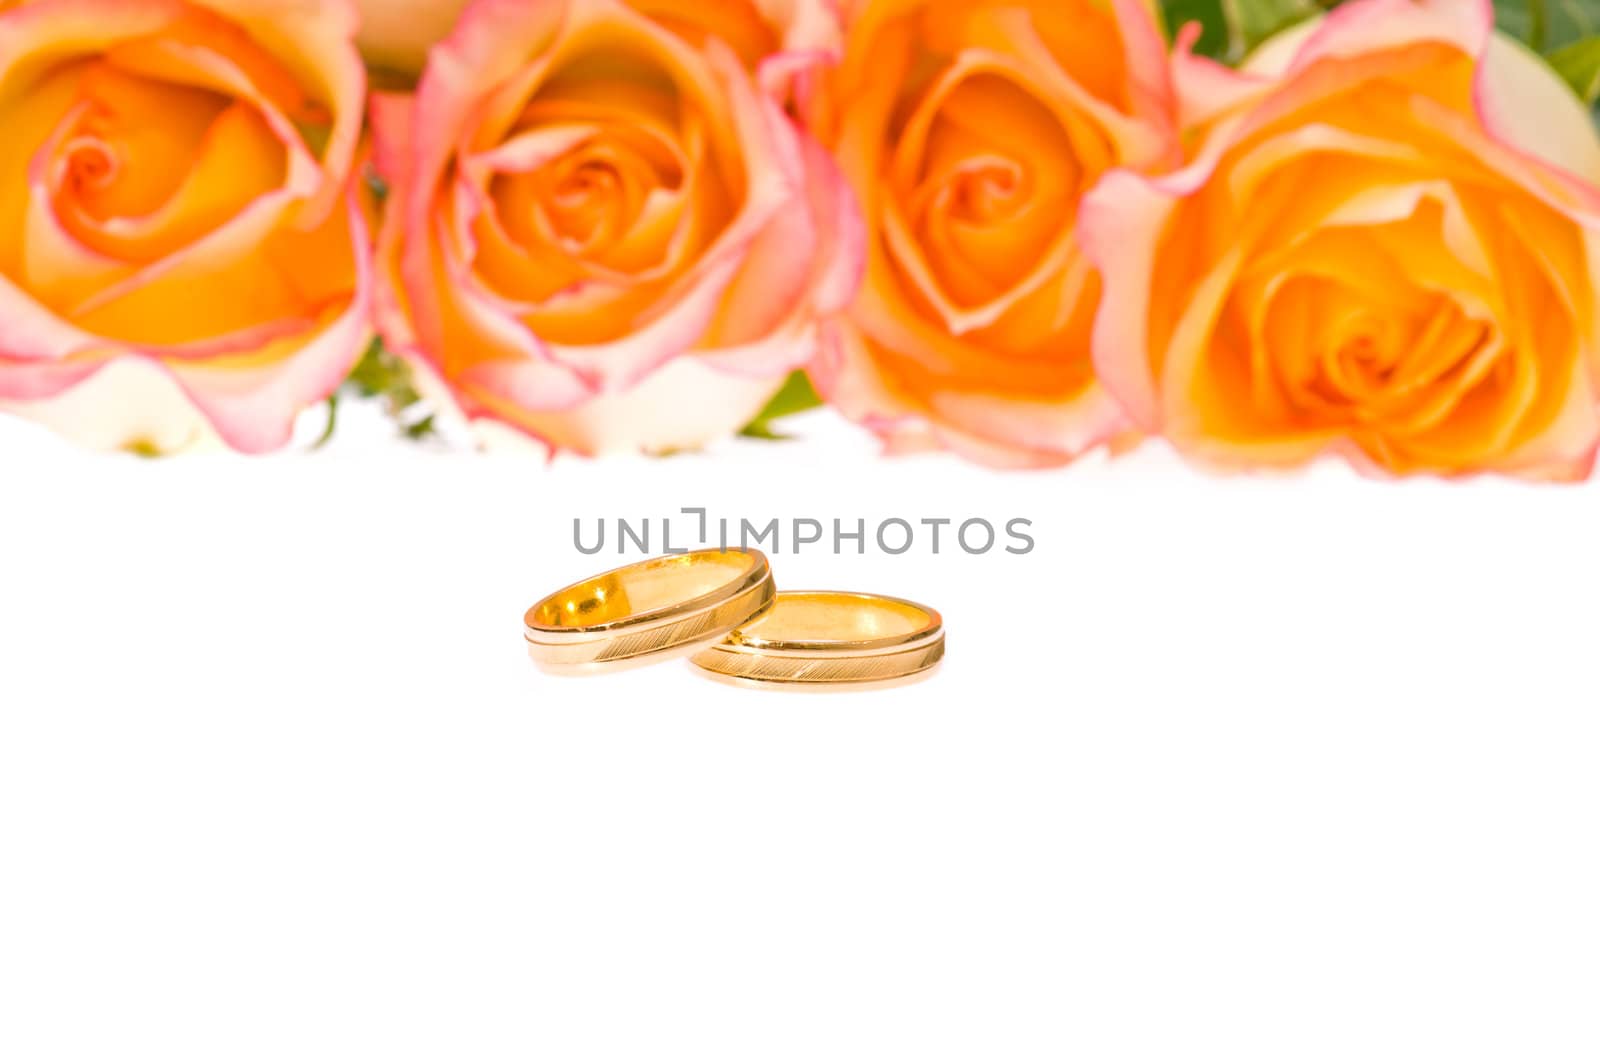 4 red yellow roses and golden wedding rings over white